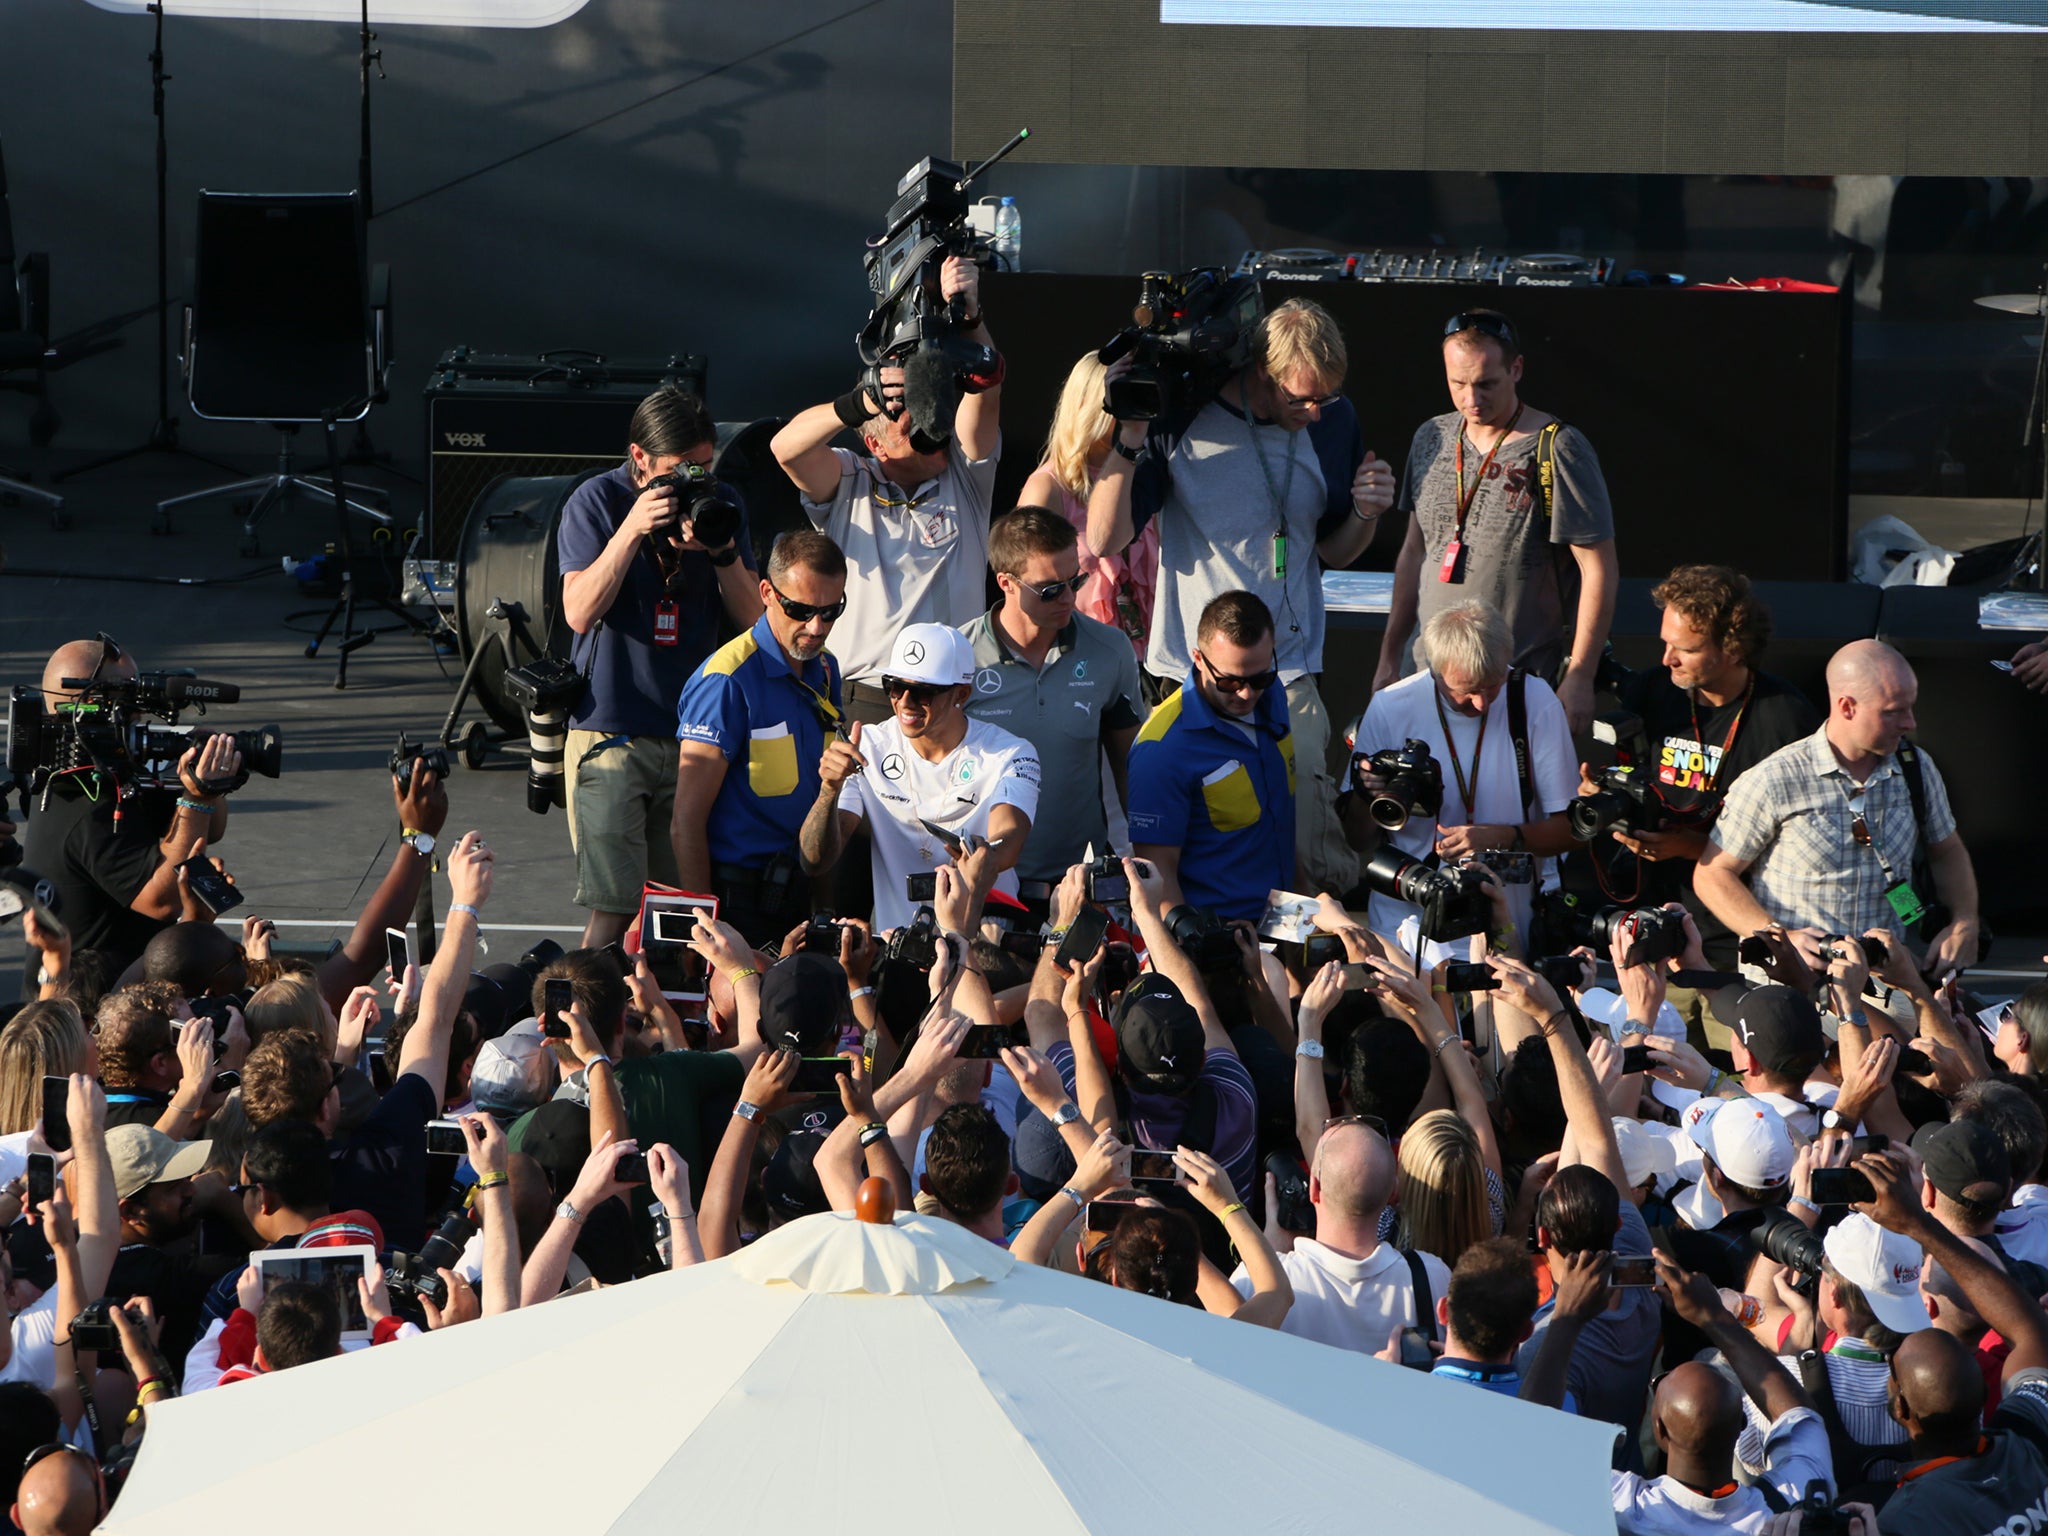 Lewis Hamilton greets fans at the Yas Marina Circuit in Abu Dhabi yesterday